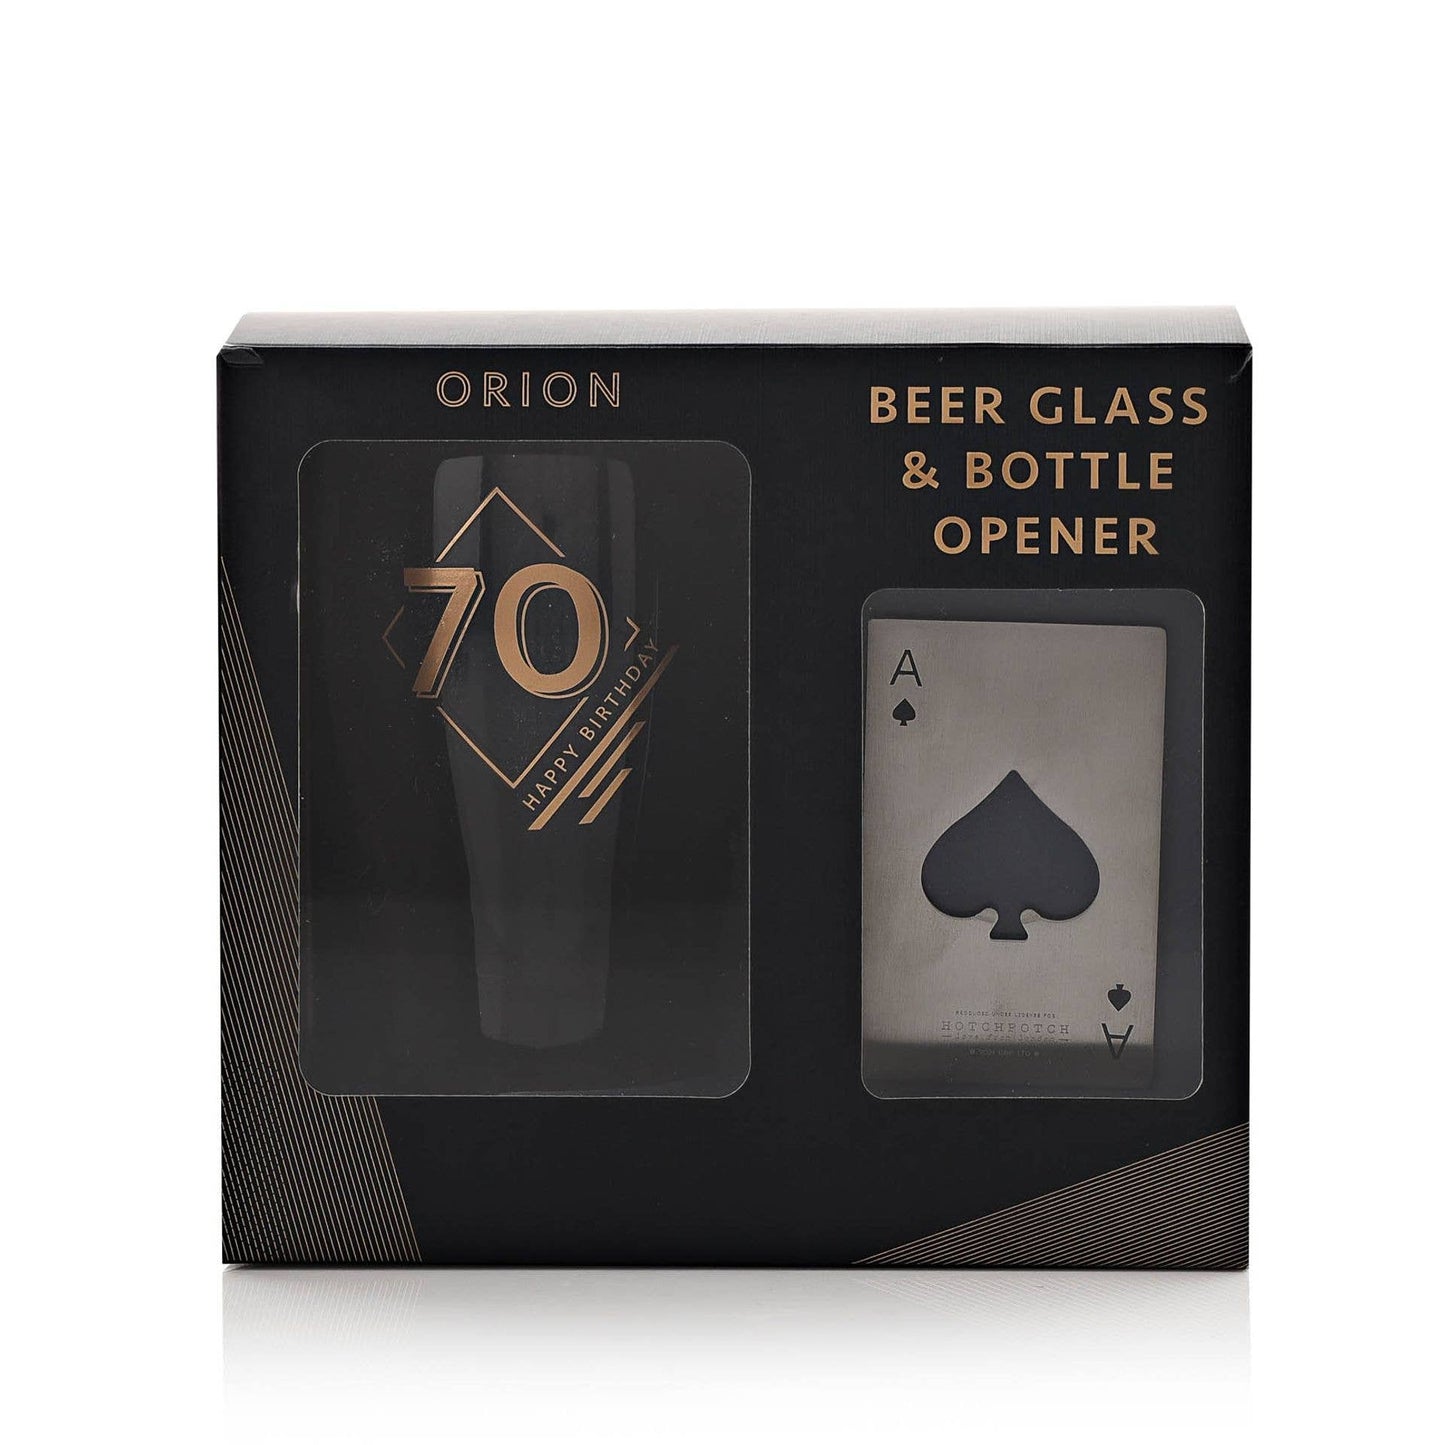 WIDDOP and Co. - Hotchpotch Orion Beer Glass & Bottle Opener - 70